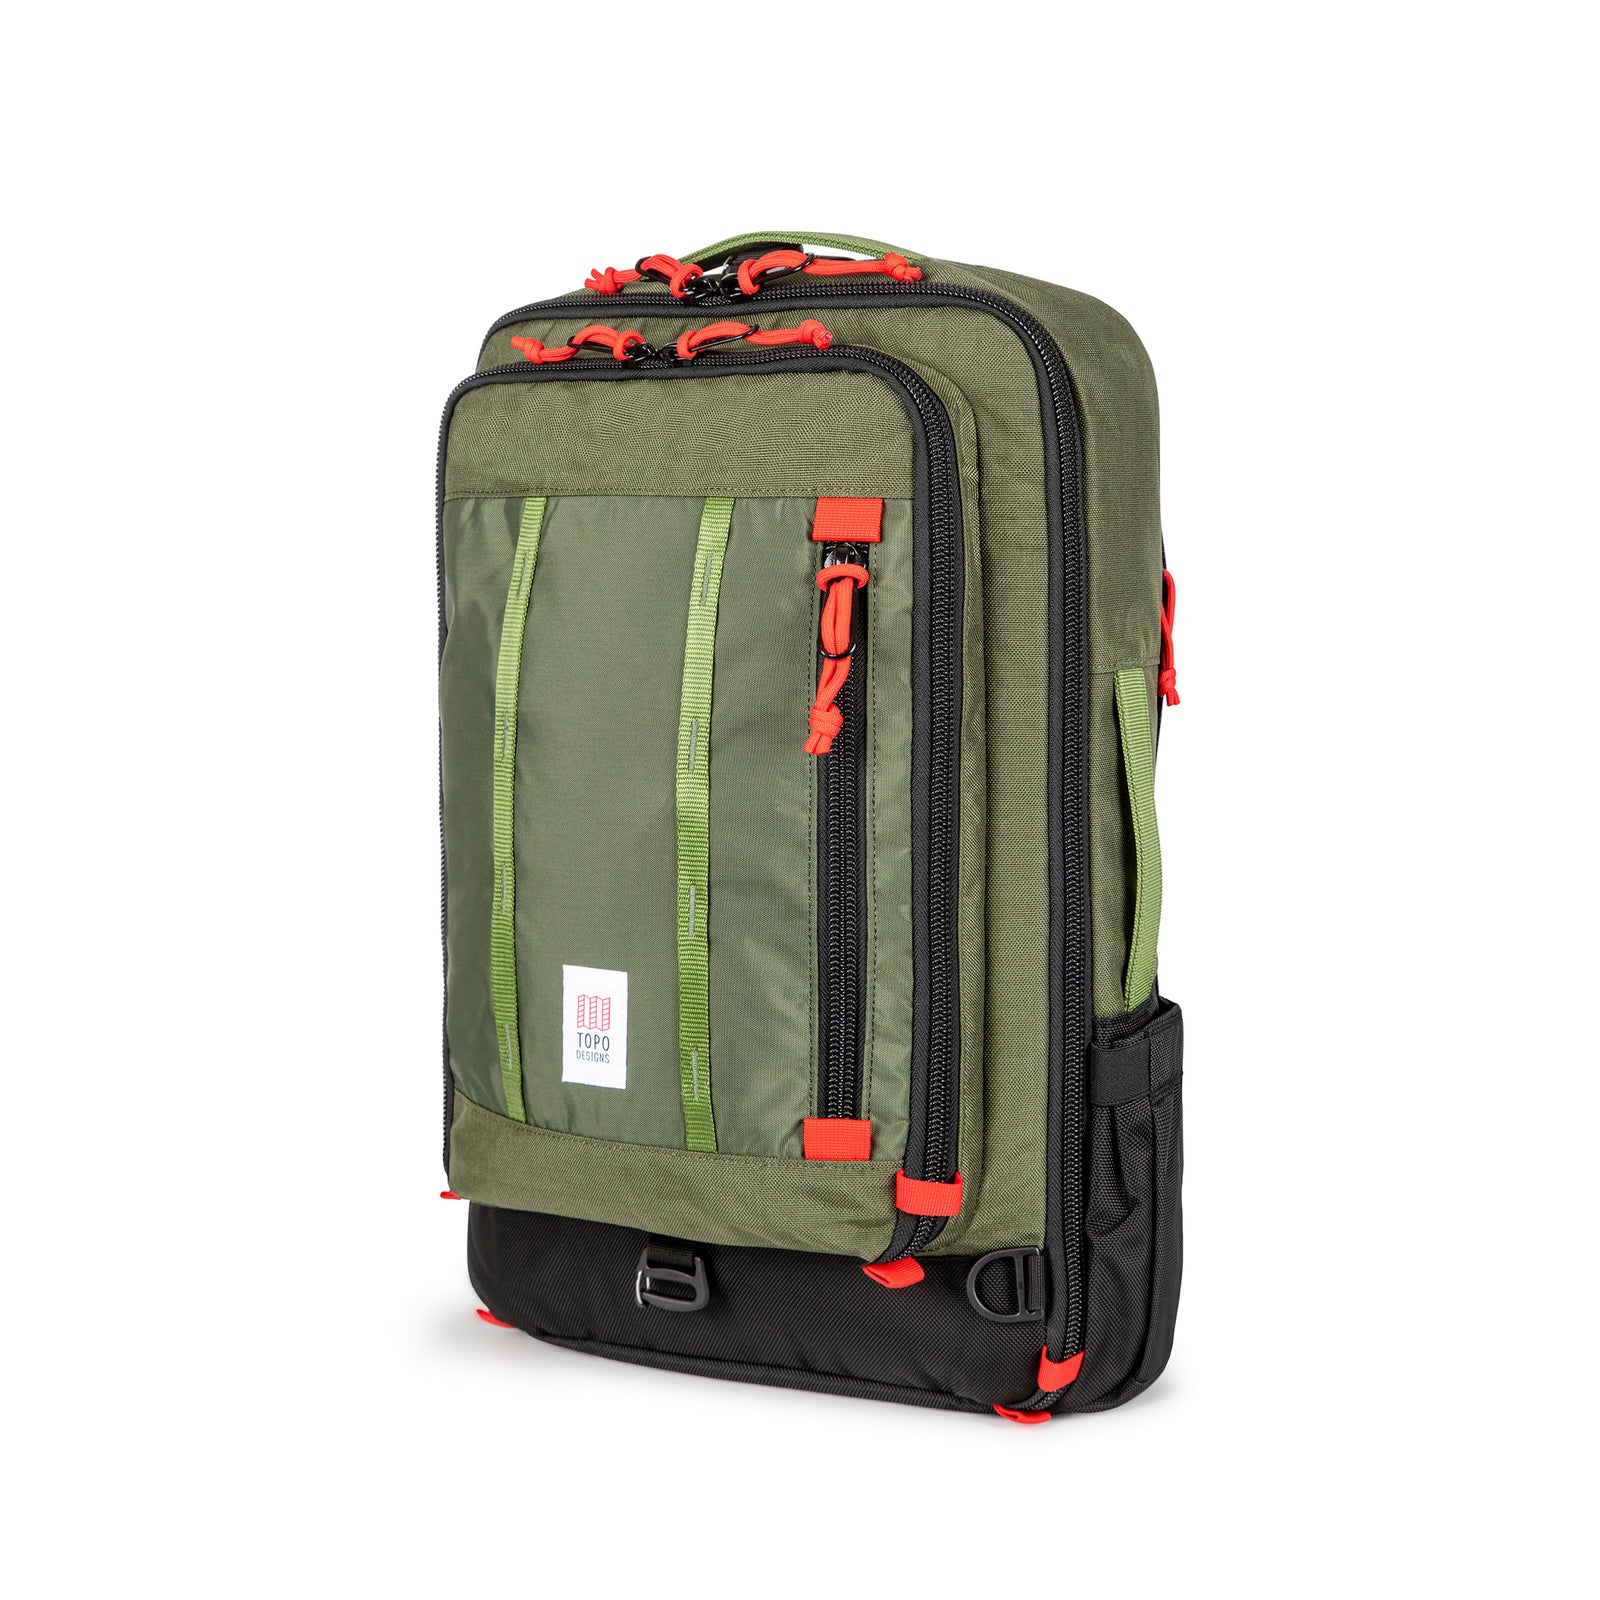 Topo Designs Global Travel Bag 30L Durable Carry On Convertible Laptop Travel Backpack in "Olive" green.